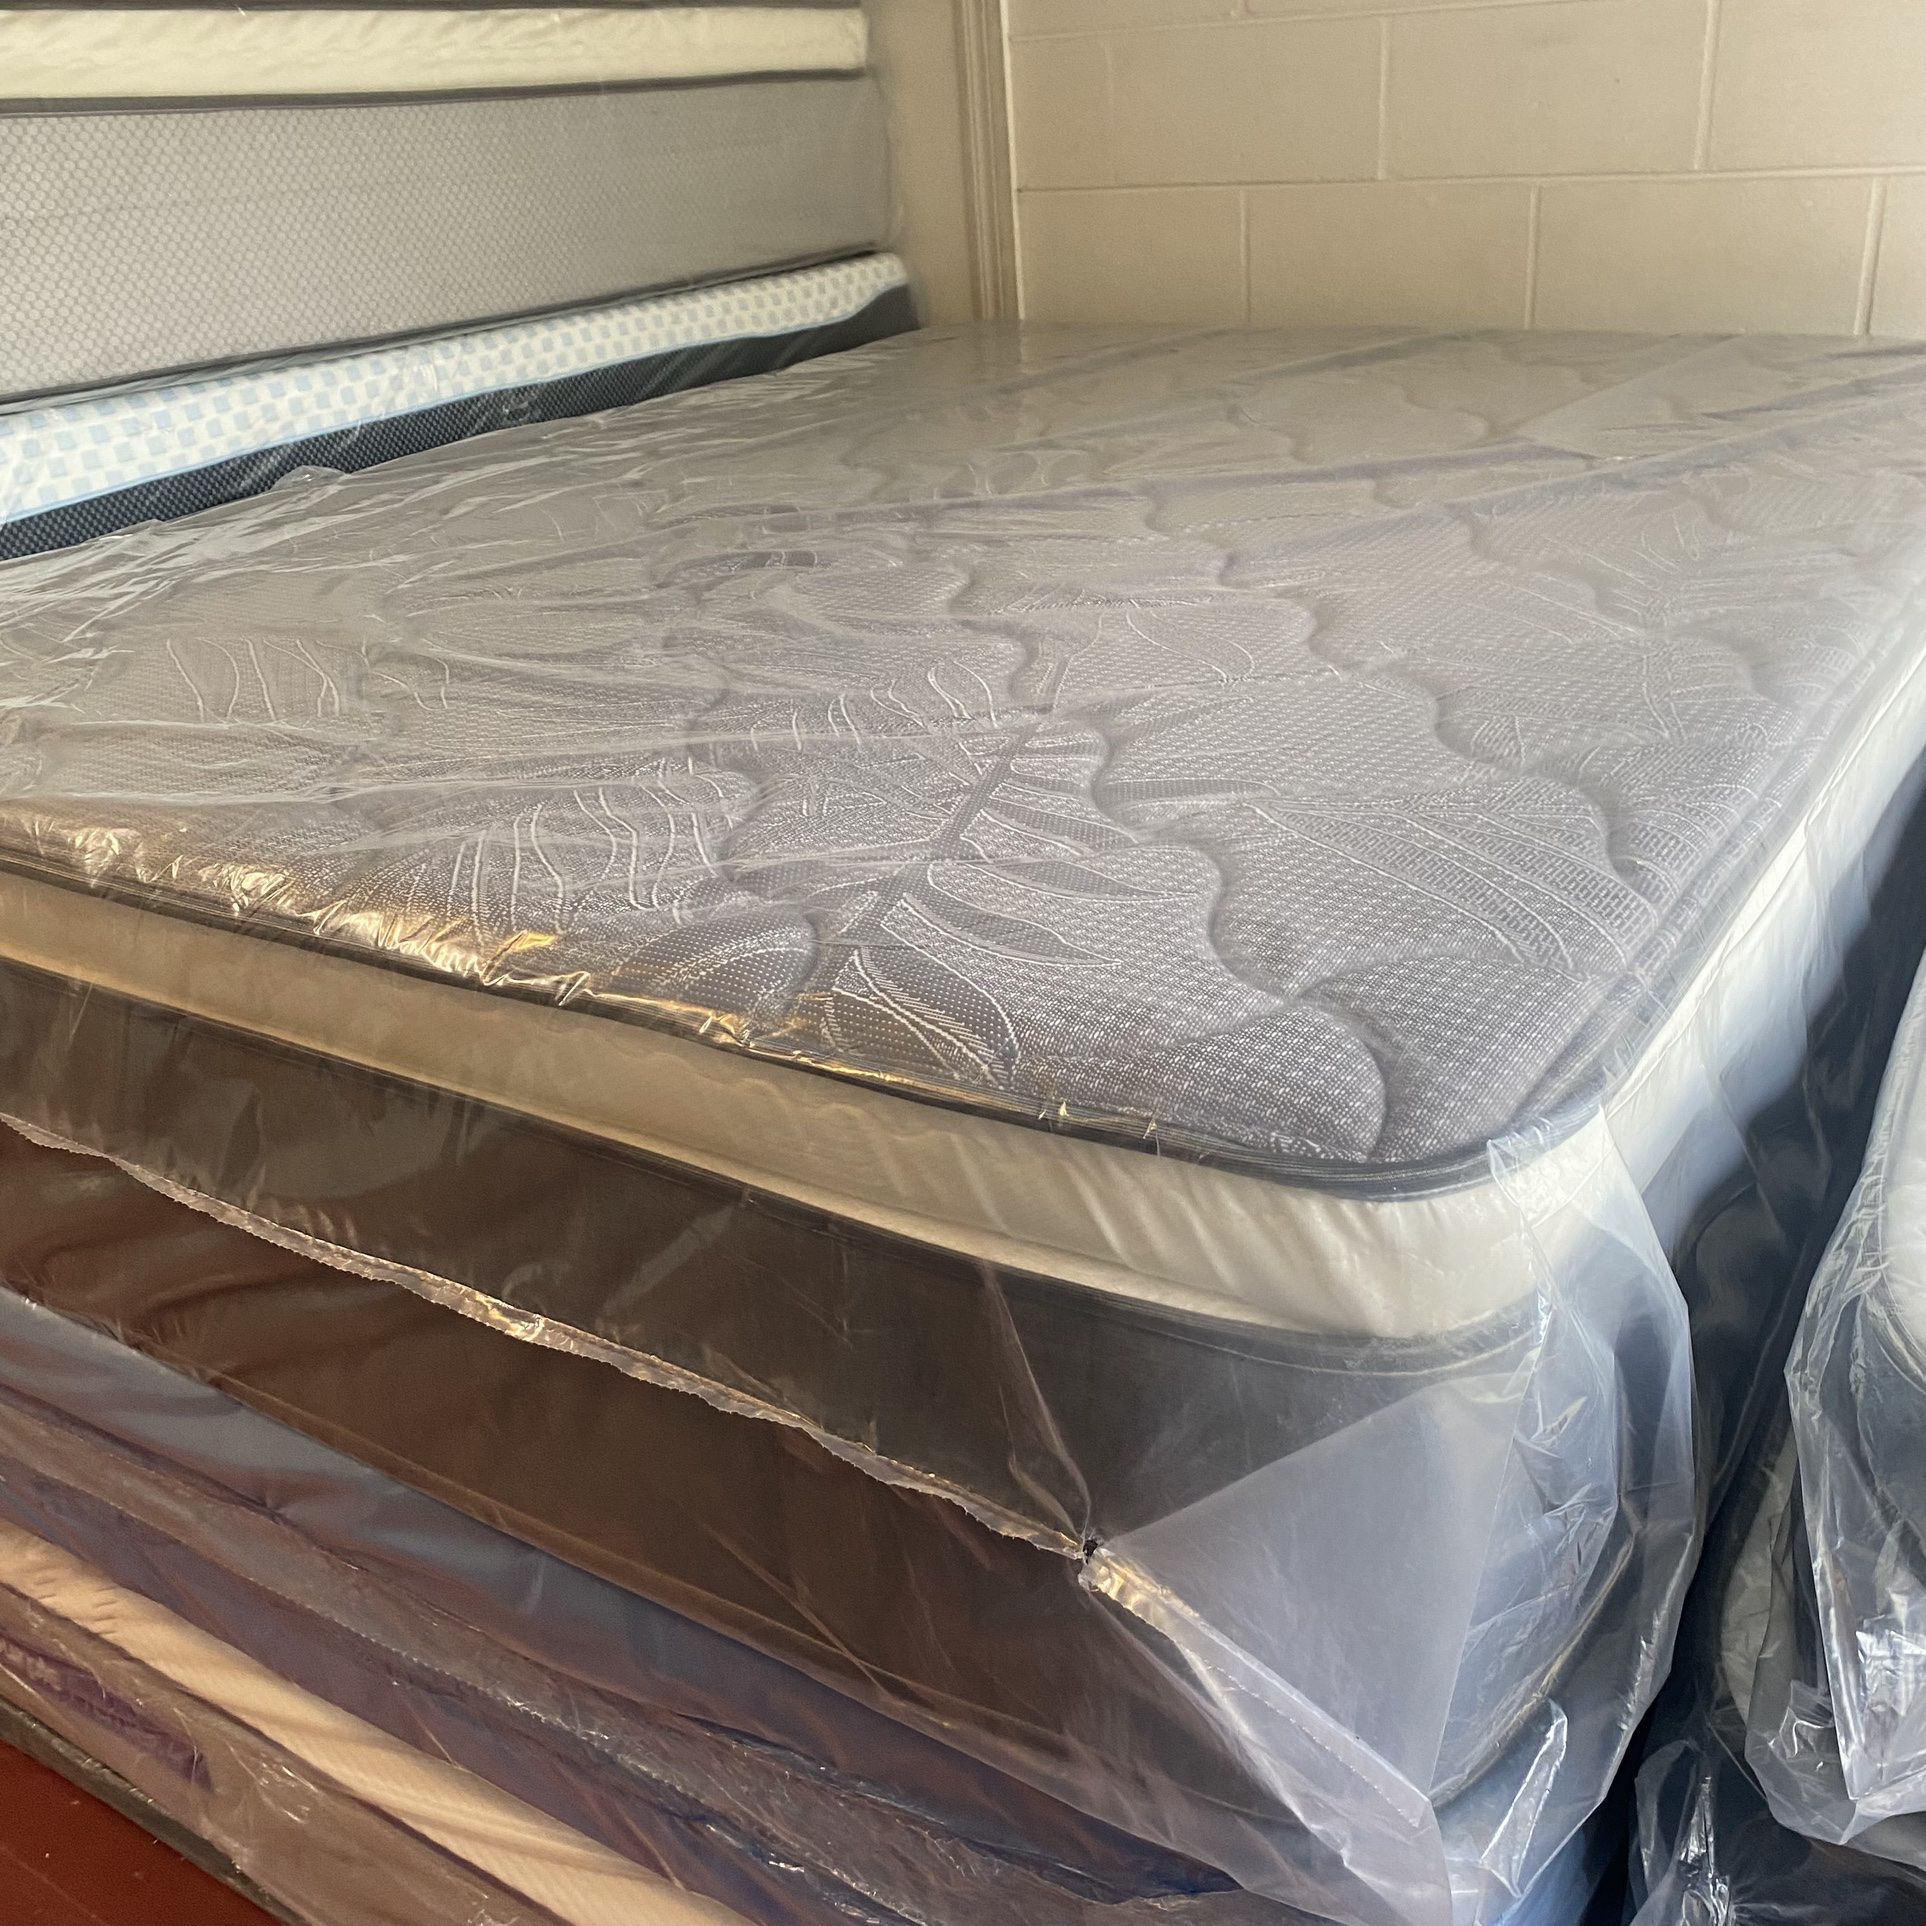 Queen Size Mattress Pillow Top 14” Inches Thick Excellent Comfort Also Available: Twin, Full And King New From Factory Delivery Available